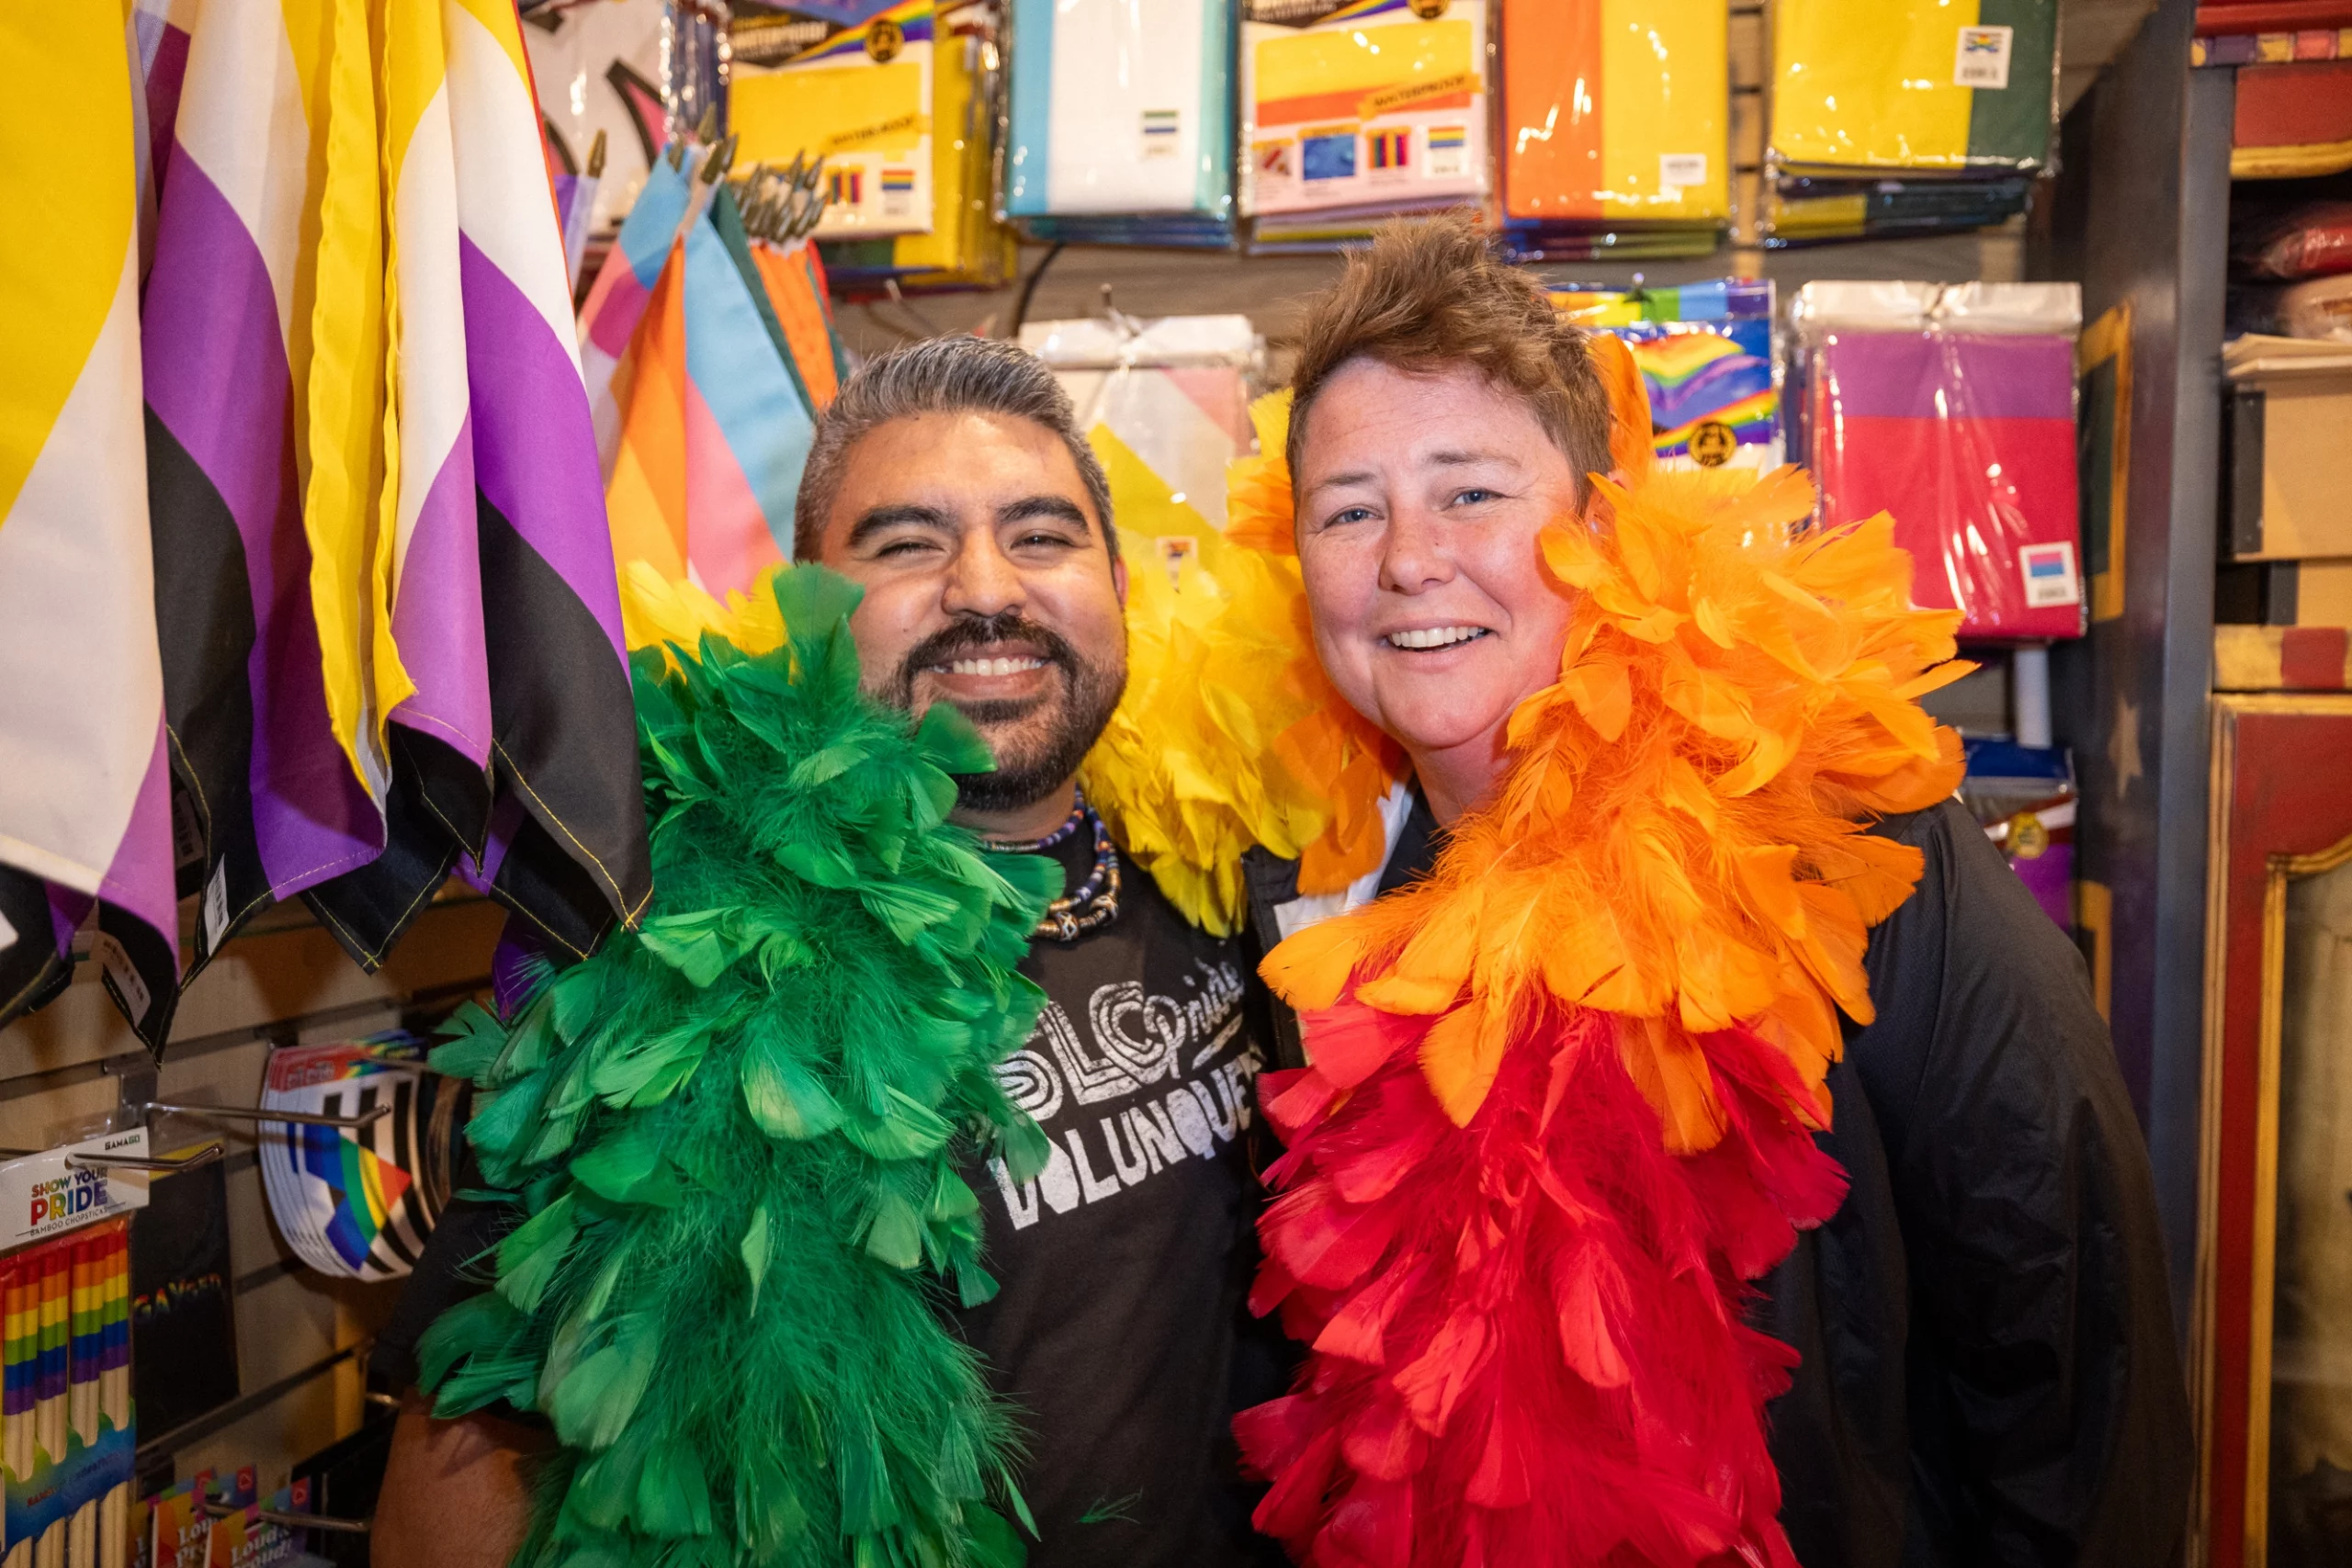 Roberto Lopez and Bonnie O’Brien smile into the camera, they wear colorful feather boas.